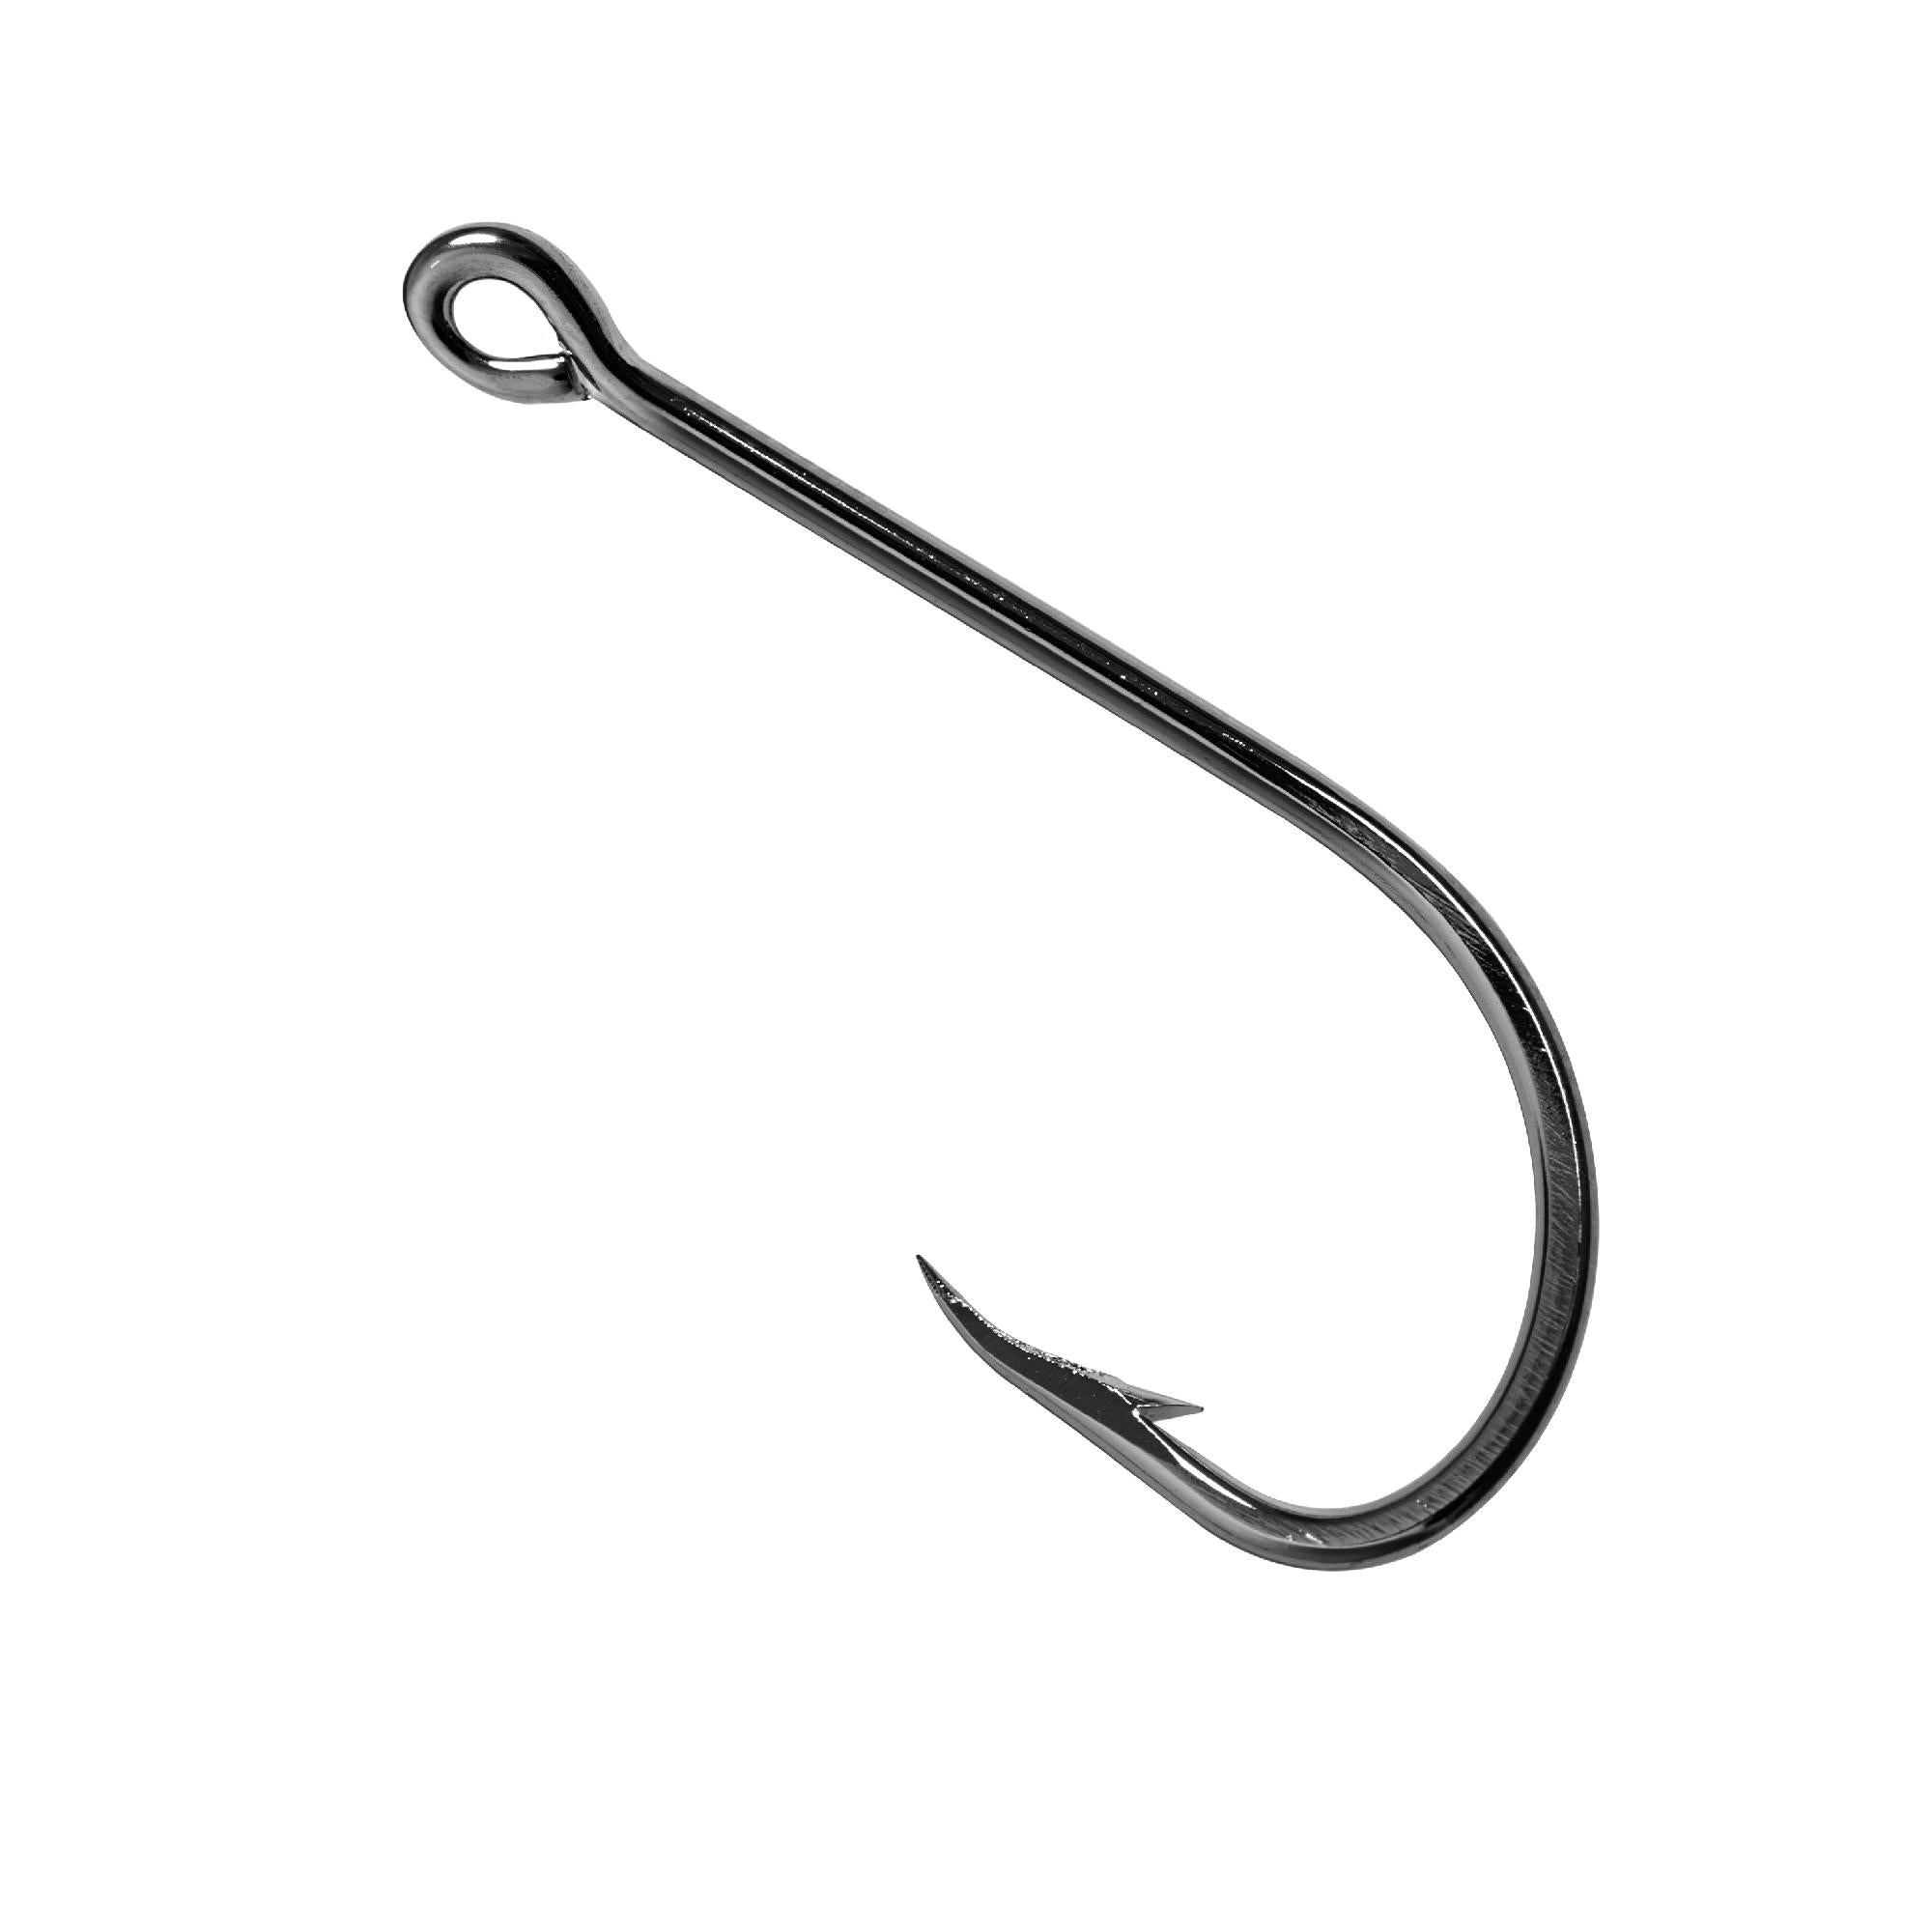 12/0 Mustad Wrecking Treble - sold individually by Fishing Weight Moul by  DB Angling Supplies - sold nationwide